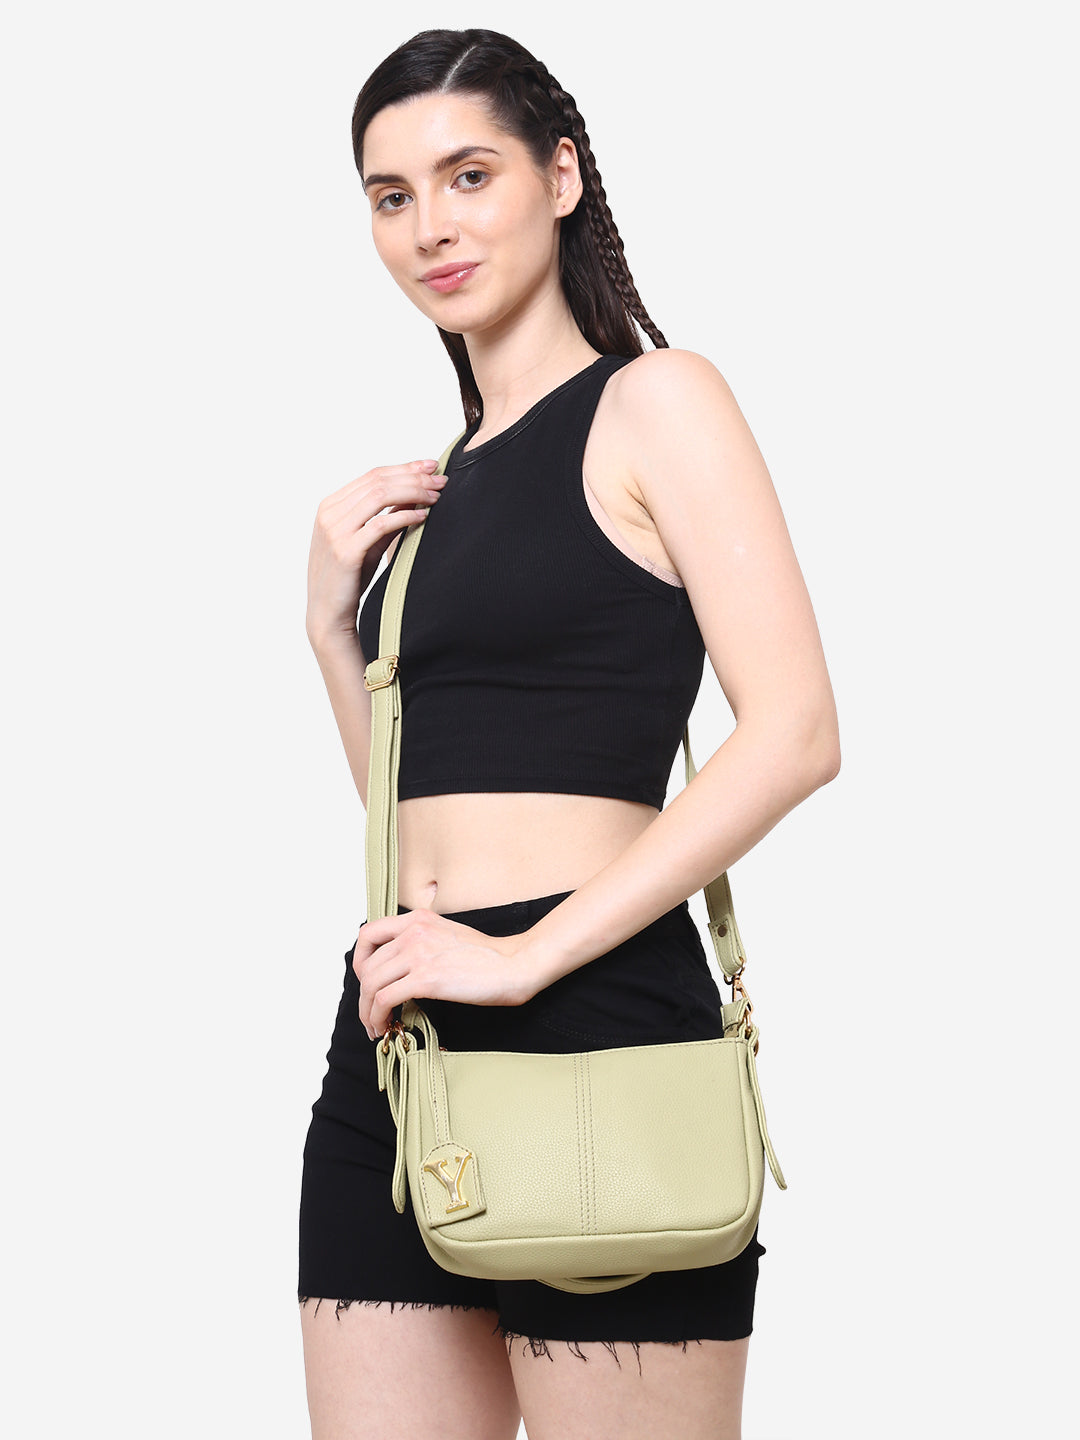 Baguette bag with long sling (Lime Green)